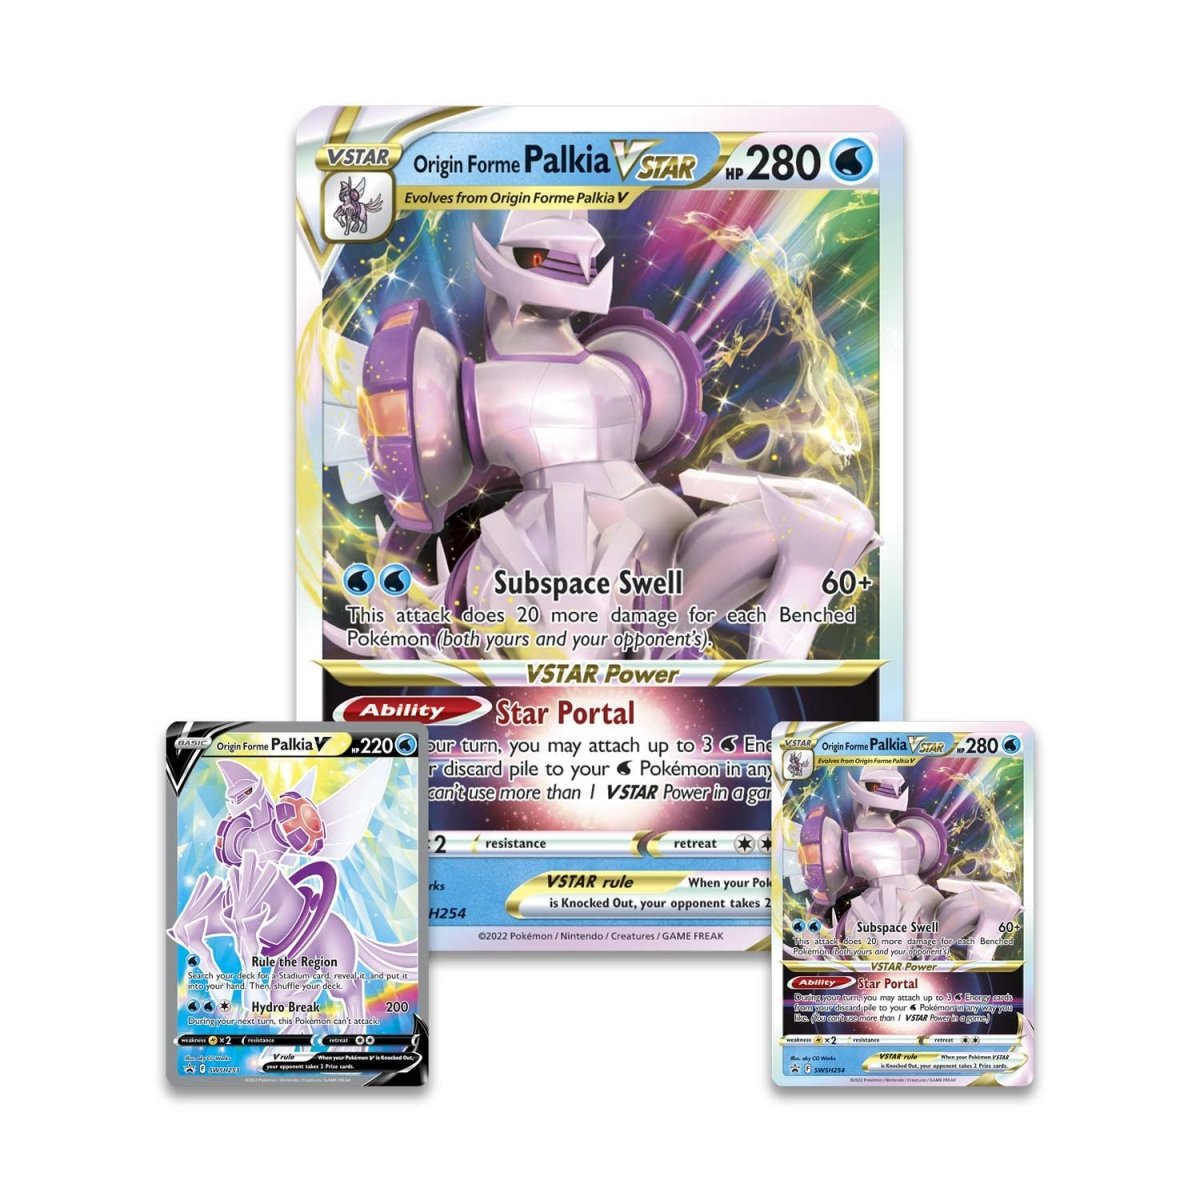 Gold Mewtwo VStar from the Pokémon go set coming soon. : r/PokemonTCG